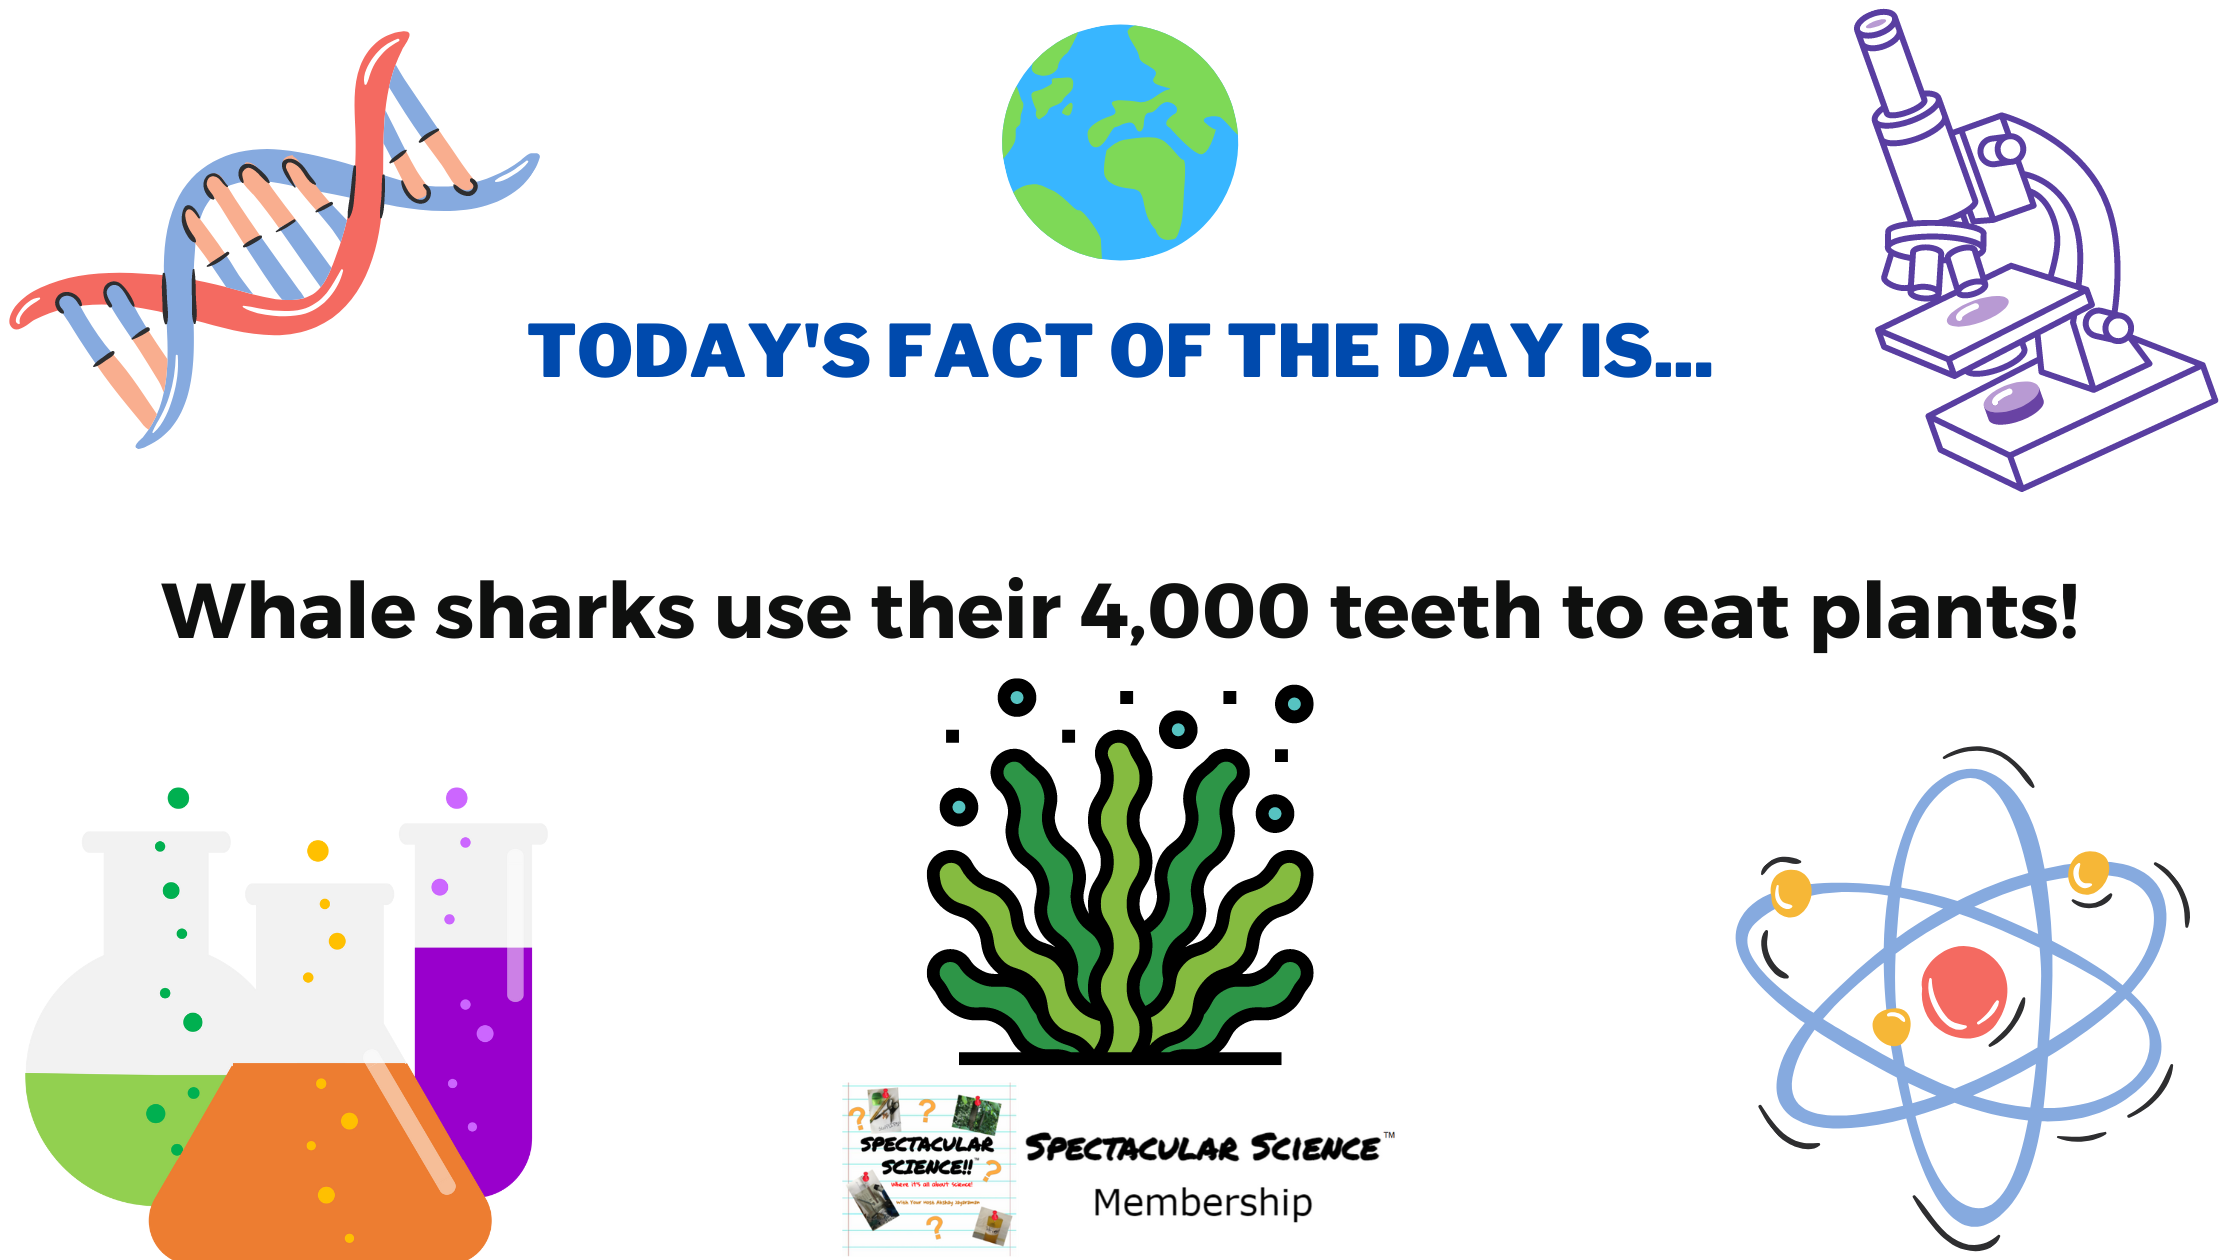 Fact of the Day Image August 3rd